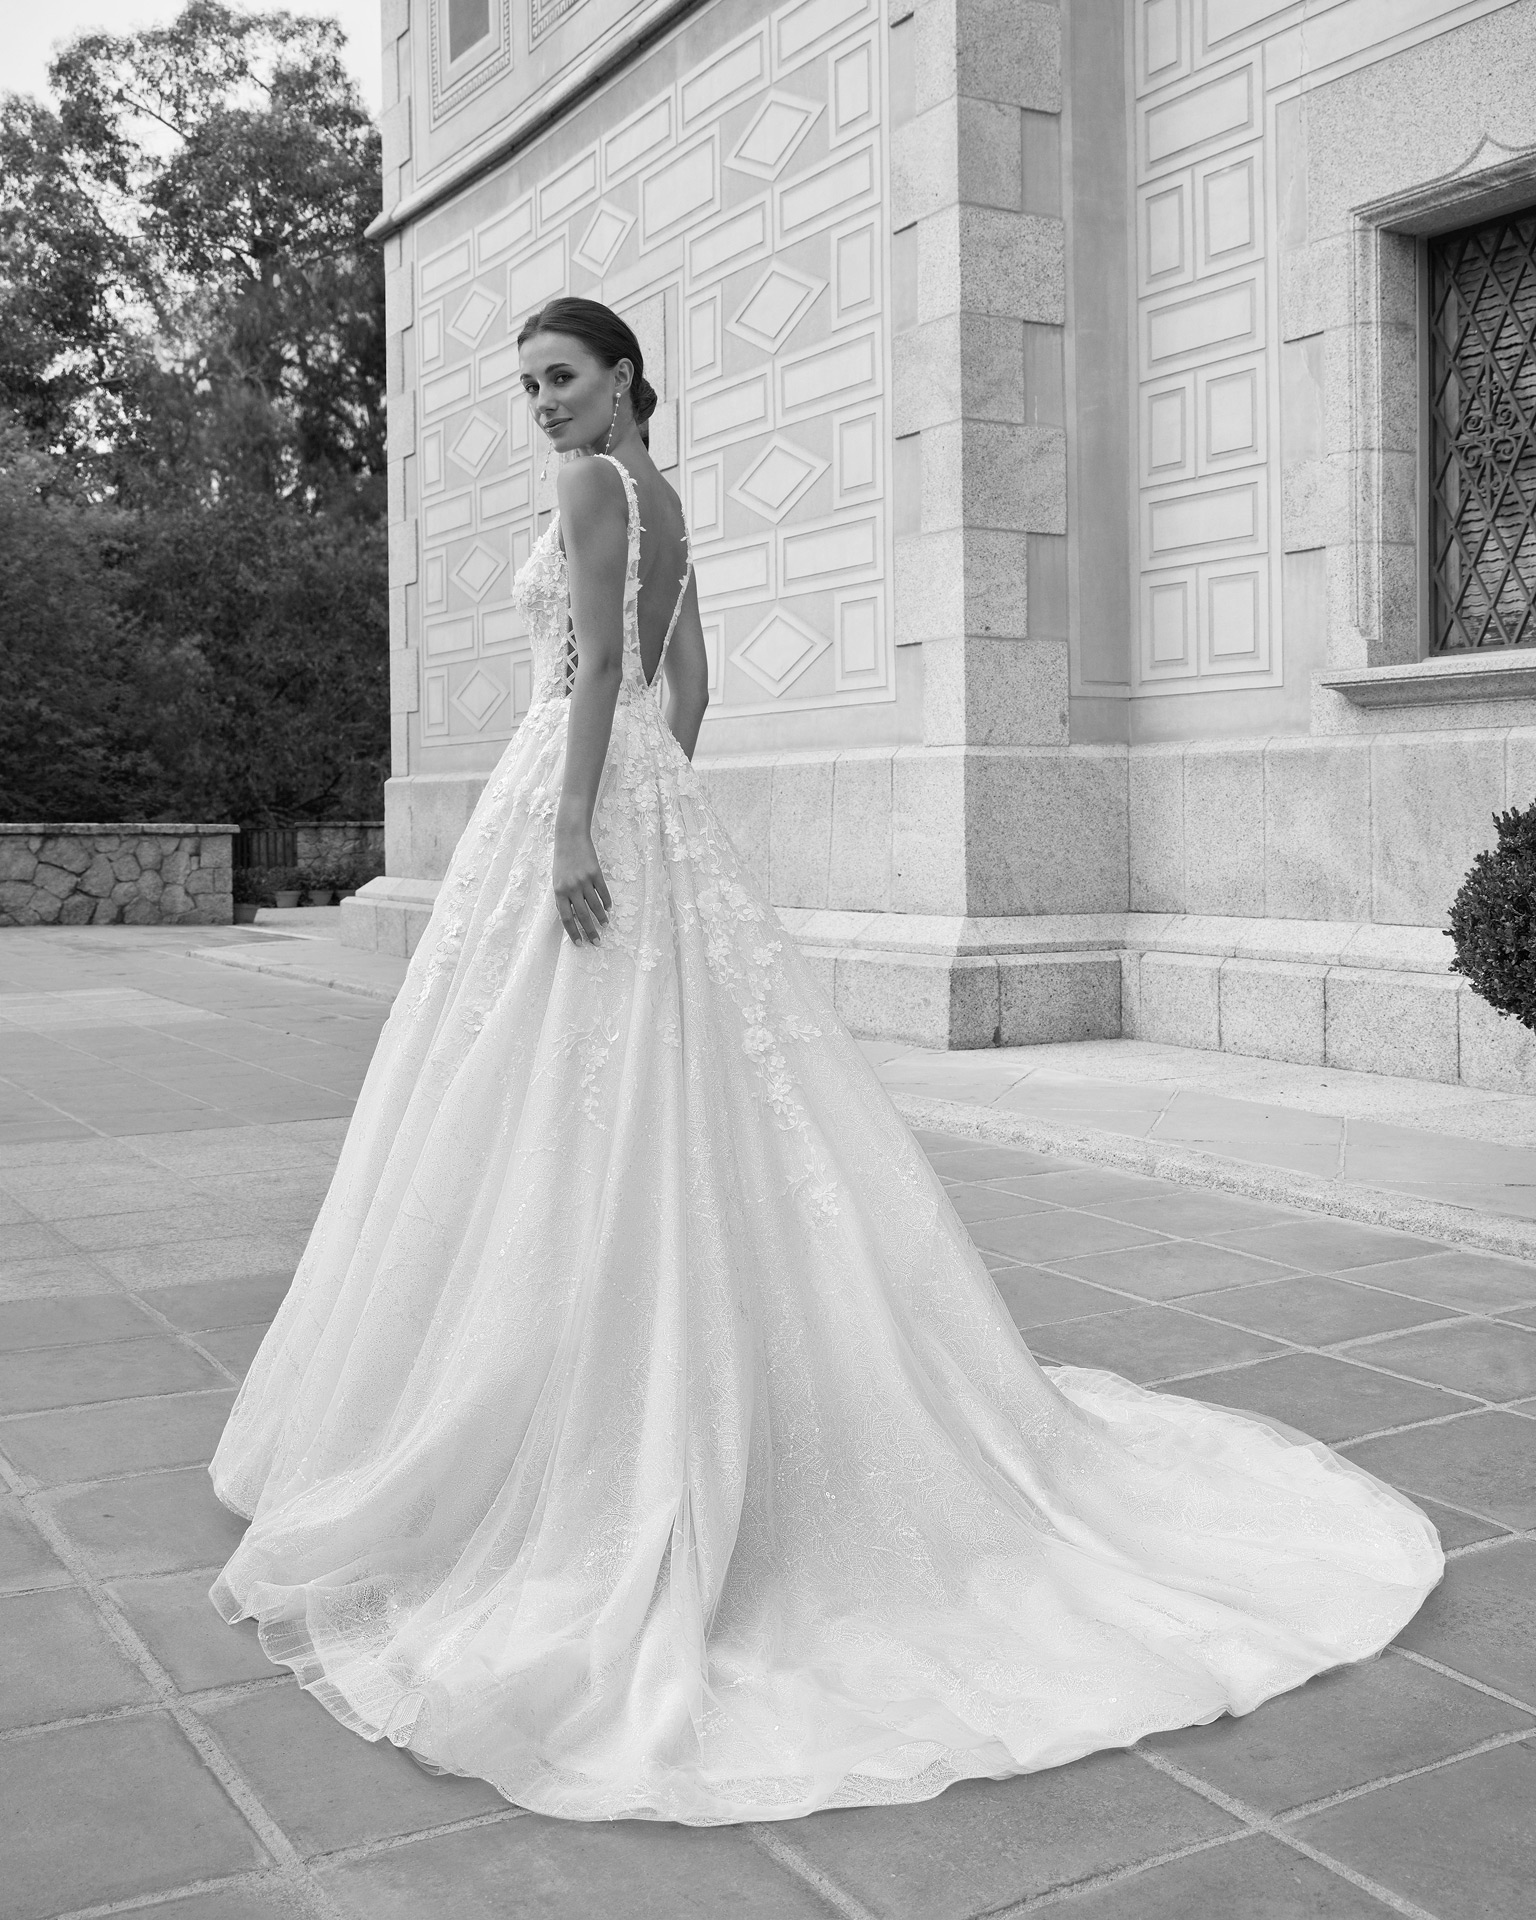 Princess-style A-line wedding dress crafted in lace and beadwork. One of the most delicate Luna Studio designs, it features a tulle skirt, plunging neckline and plunging back. LUNA_NOVIAS.